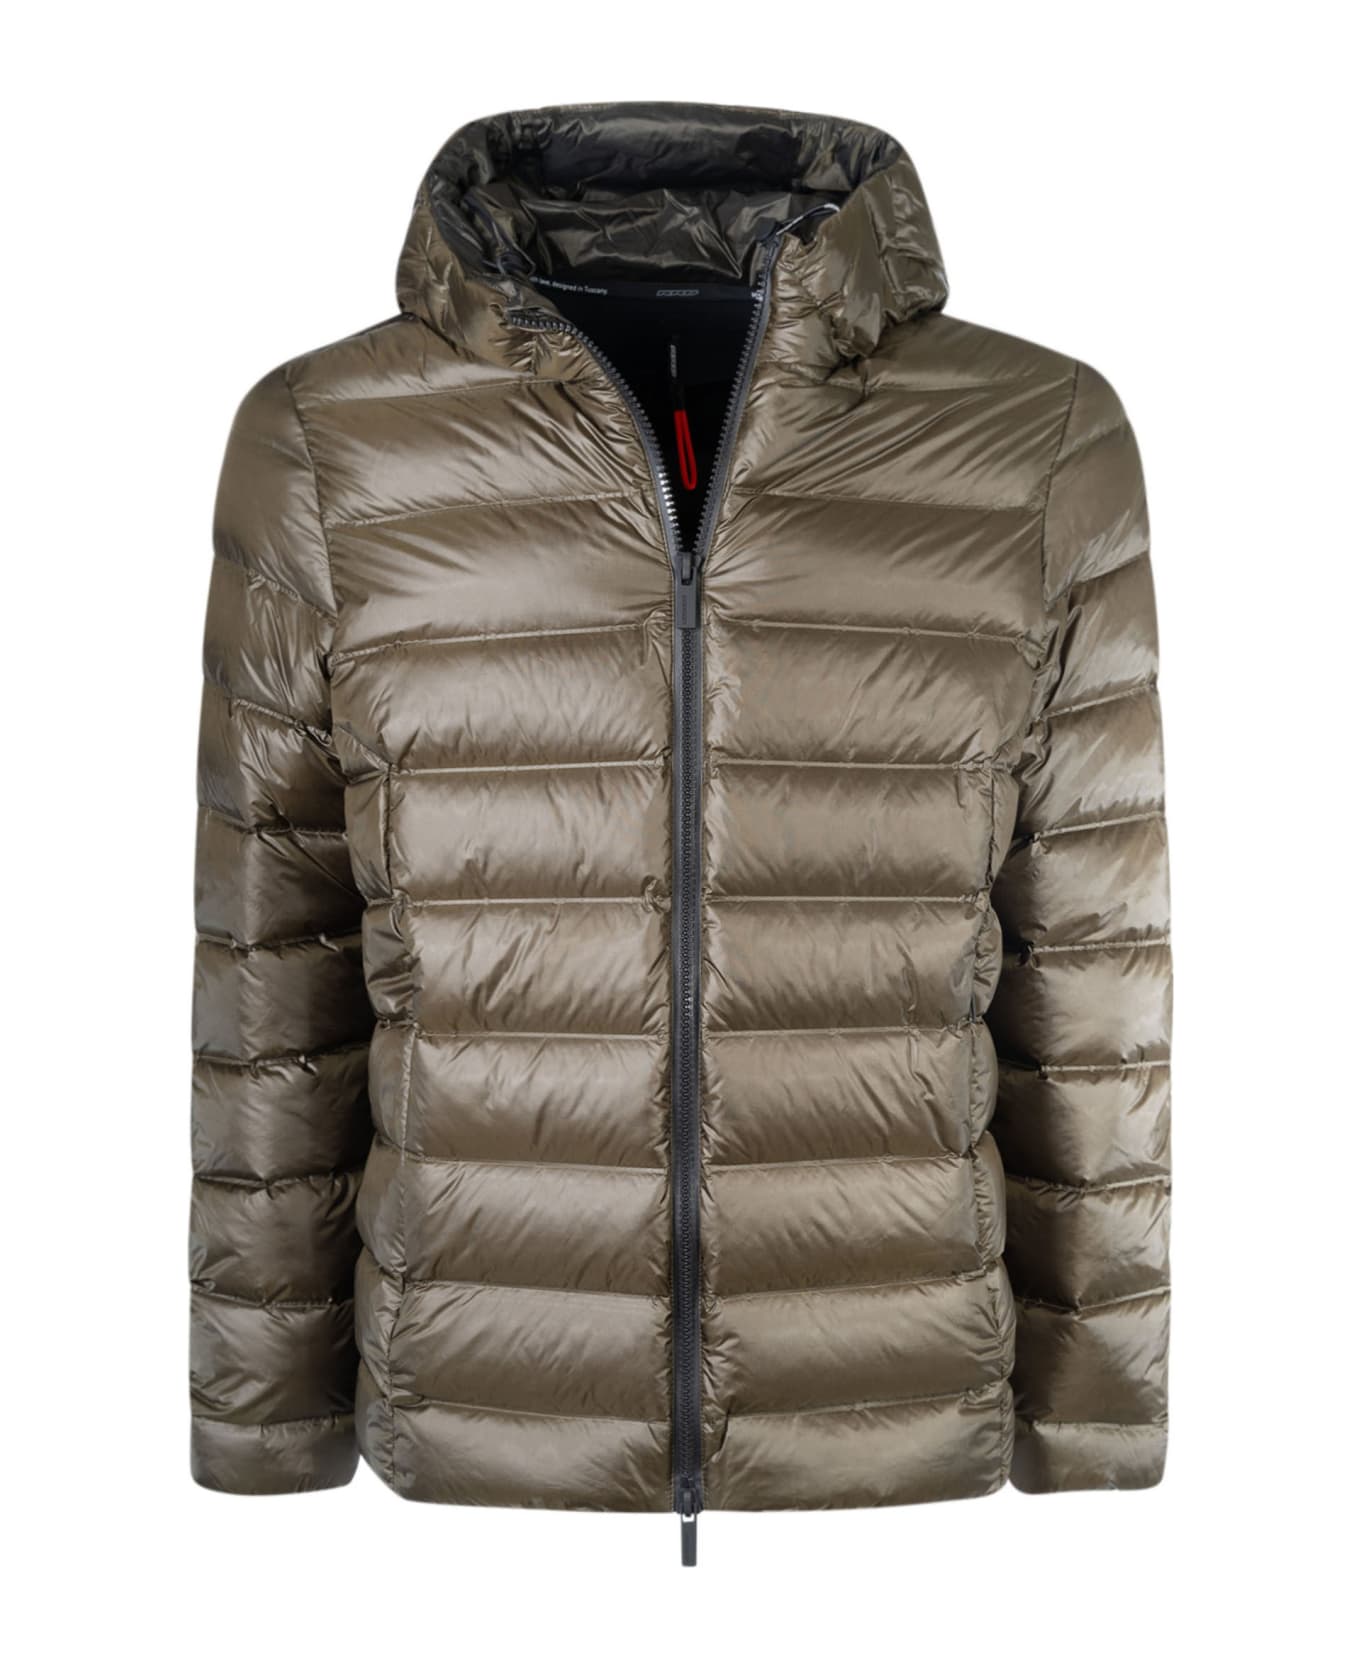 RRD - Roberto Ricci Design Classic Fitted Padded Jacket - Military Green